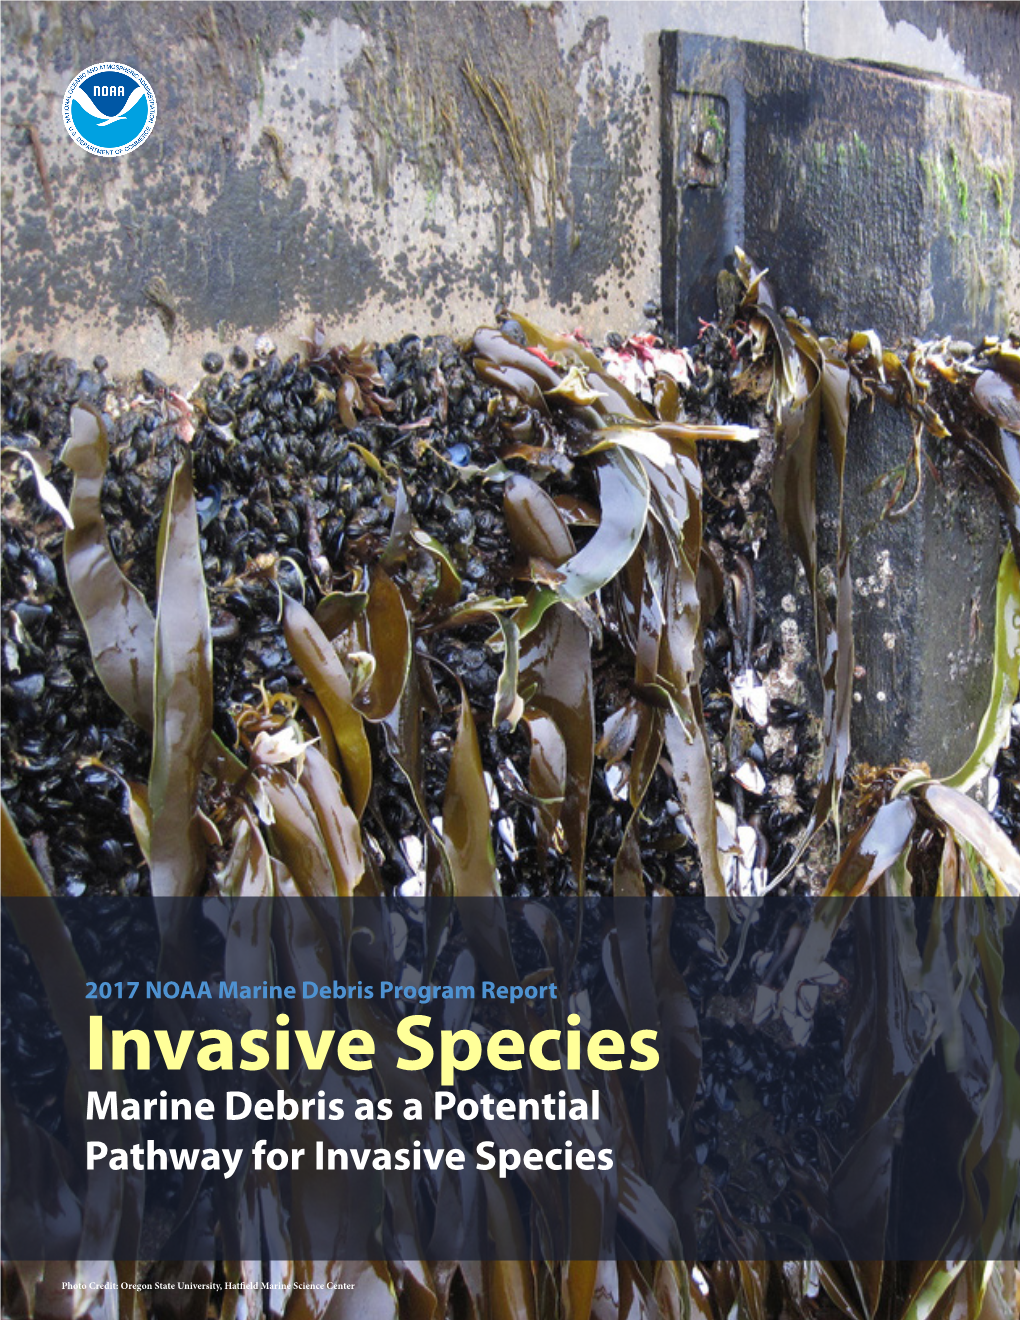 Marine Debris As a Potential Pathway for Invasive Species